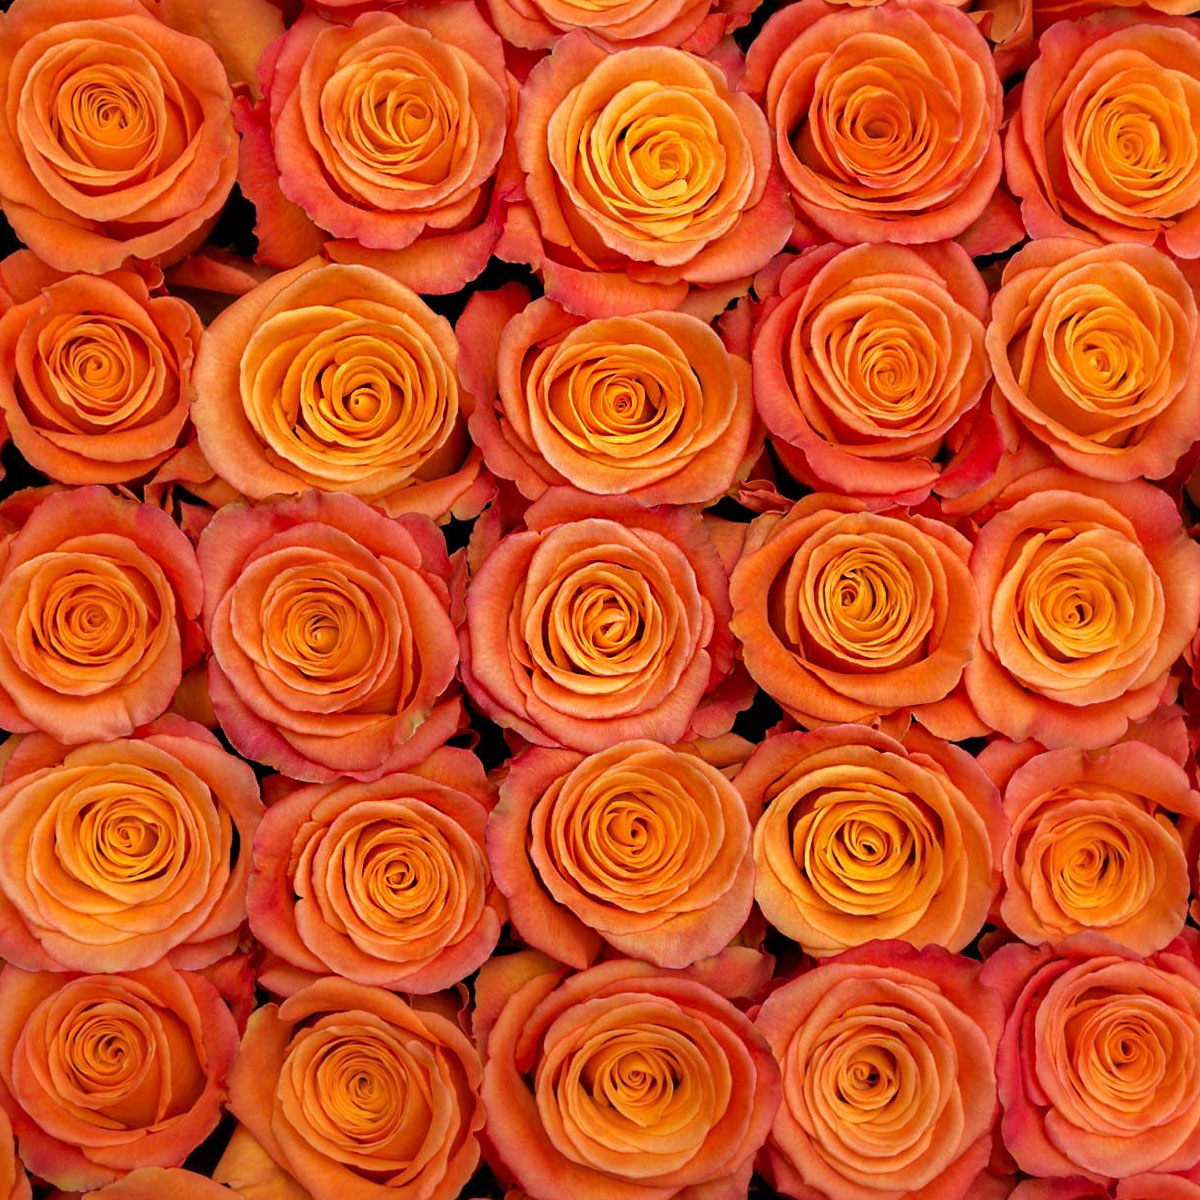 United Selections Present Its 'Autumn Selections' Roses - Rose Confidential 03